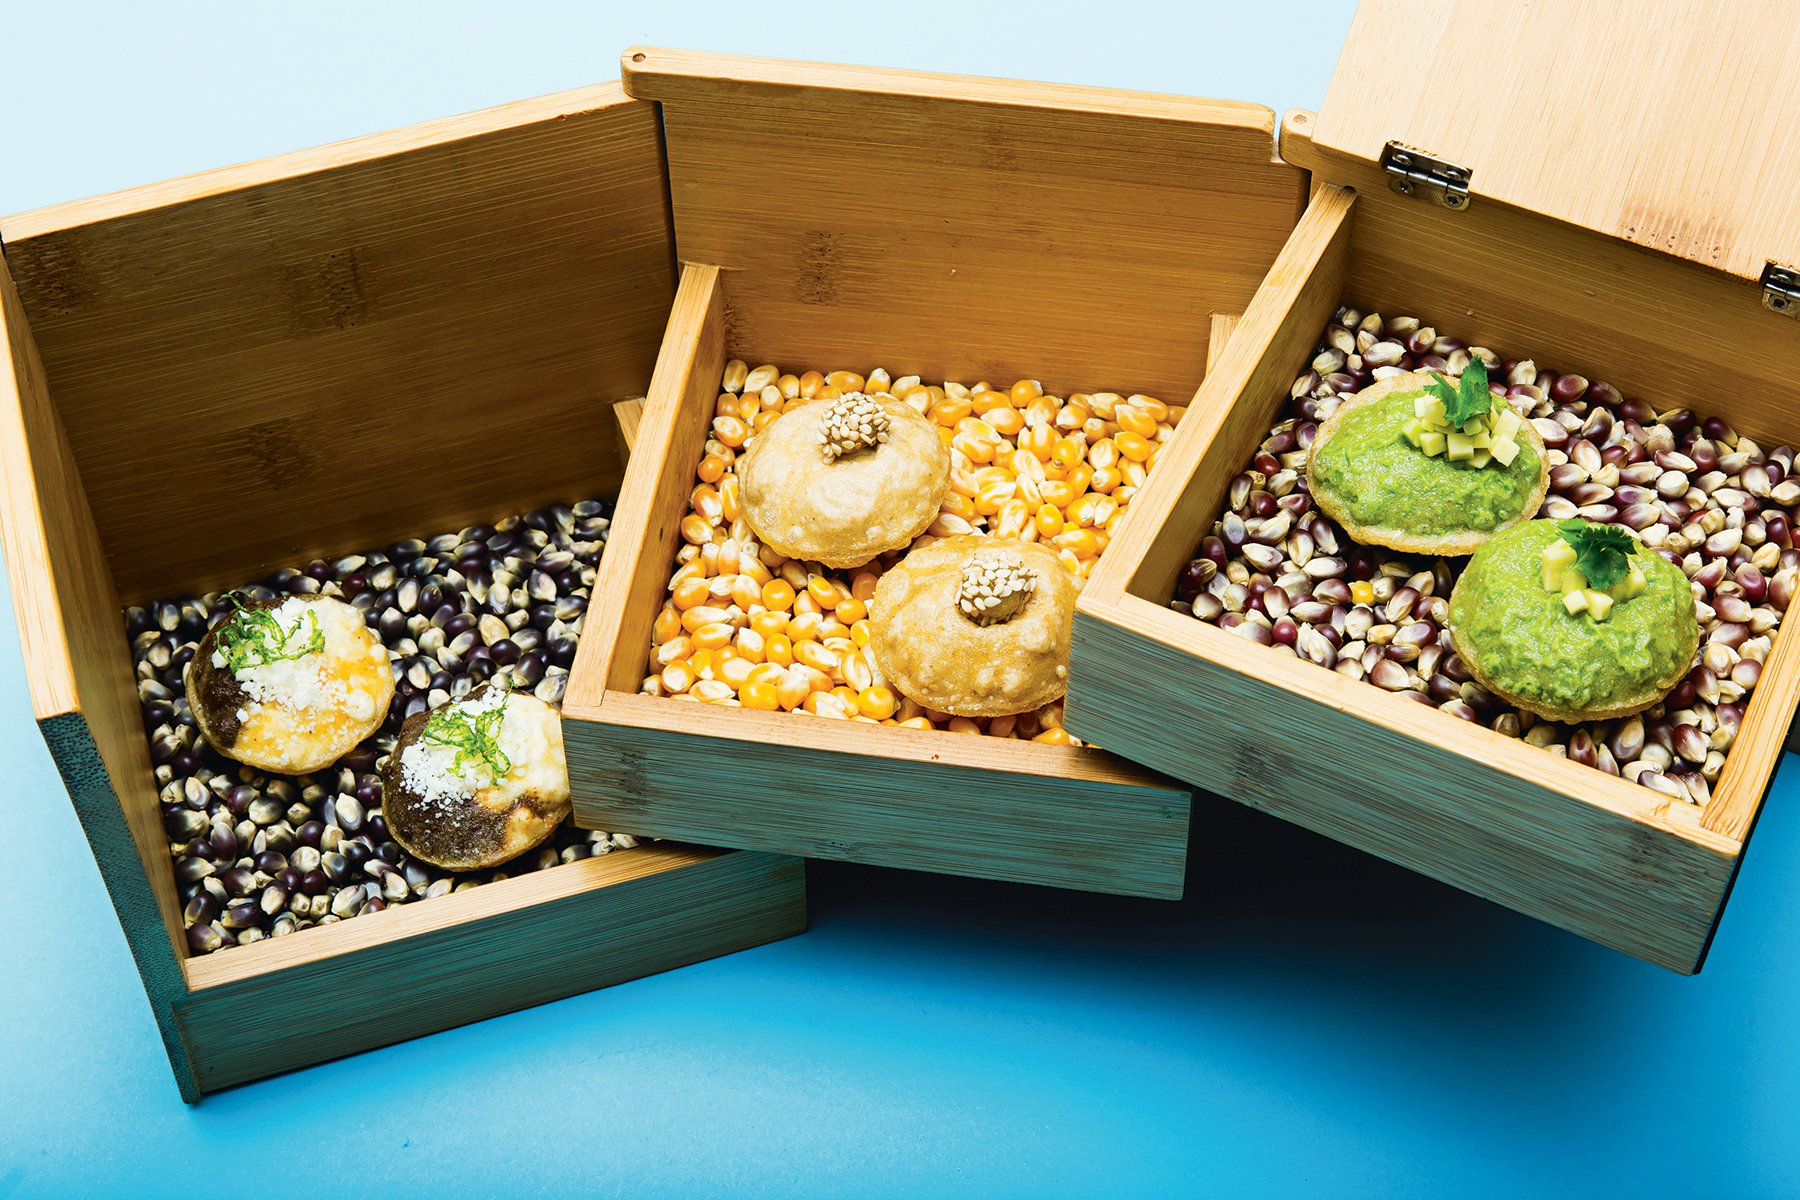 Wooden jewelry box for masa puffs at Pineapple and Pearls. Photograph by Scott Suchman.